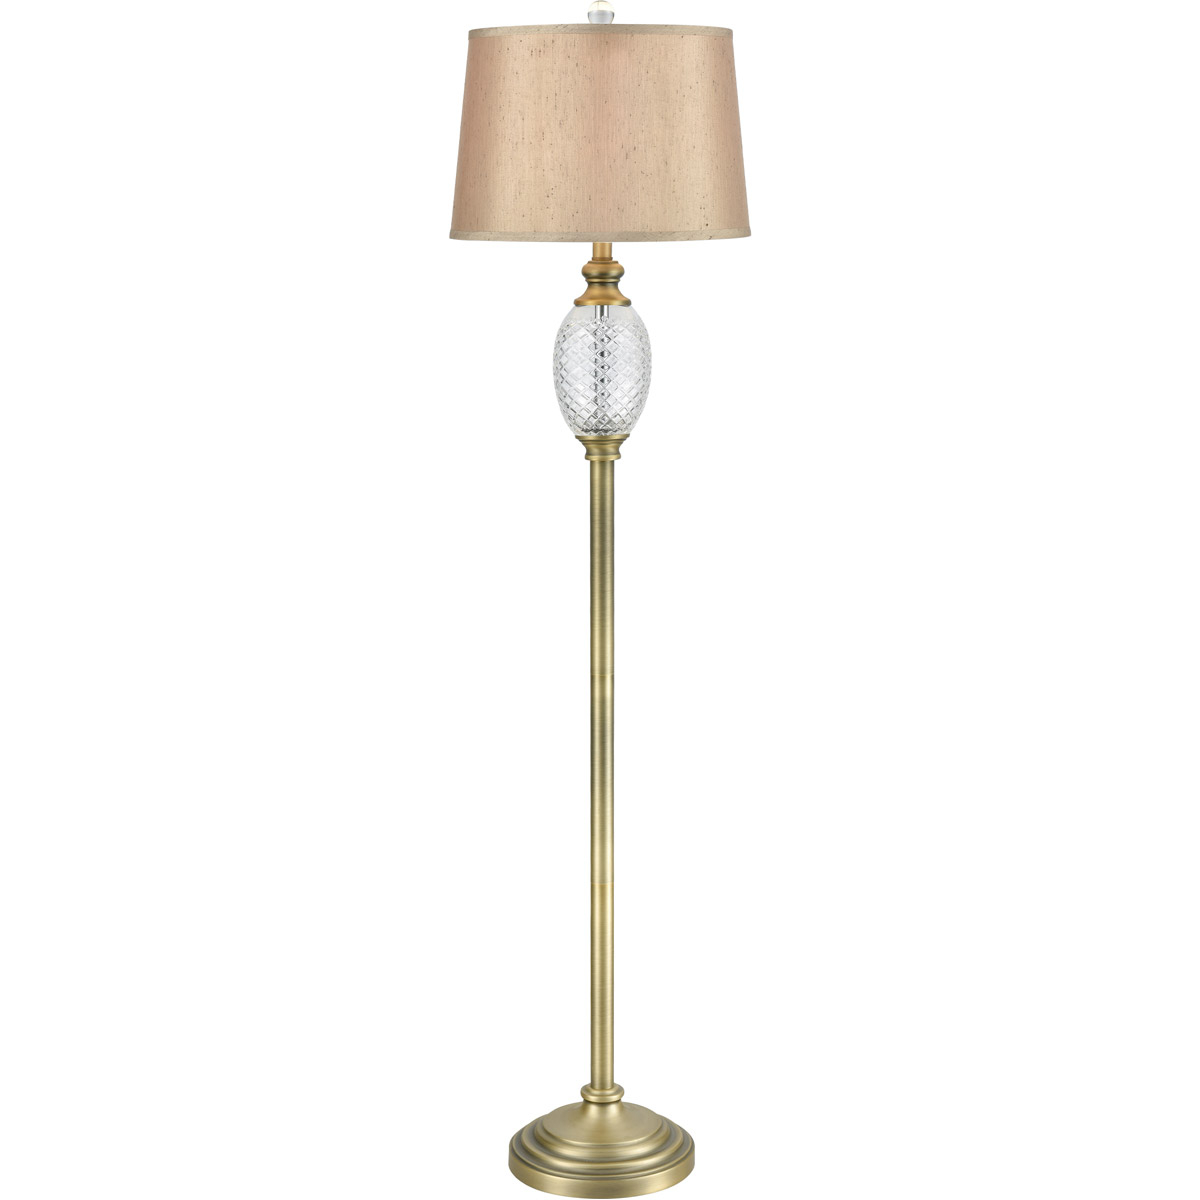 Details About Dale Tiffany Sgf17179 Brass Pineapple Floor Lamp Antique Nickel inside size 1200 X 1200